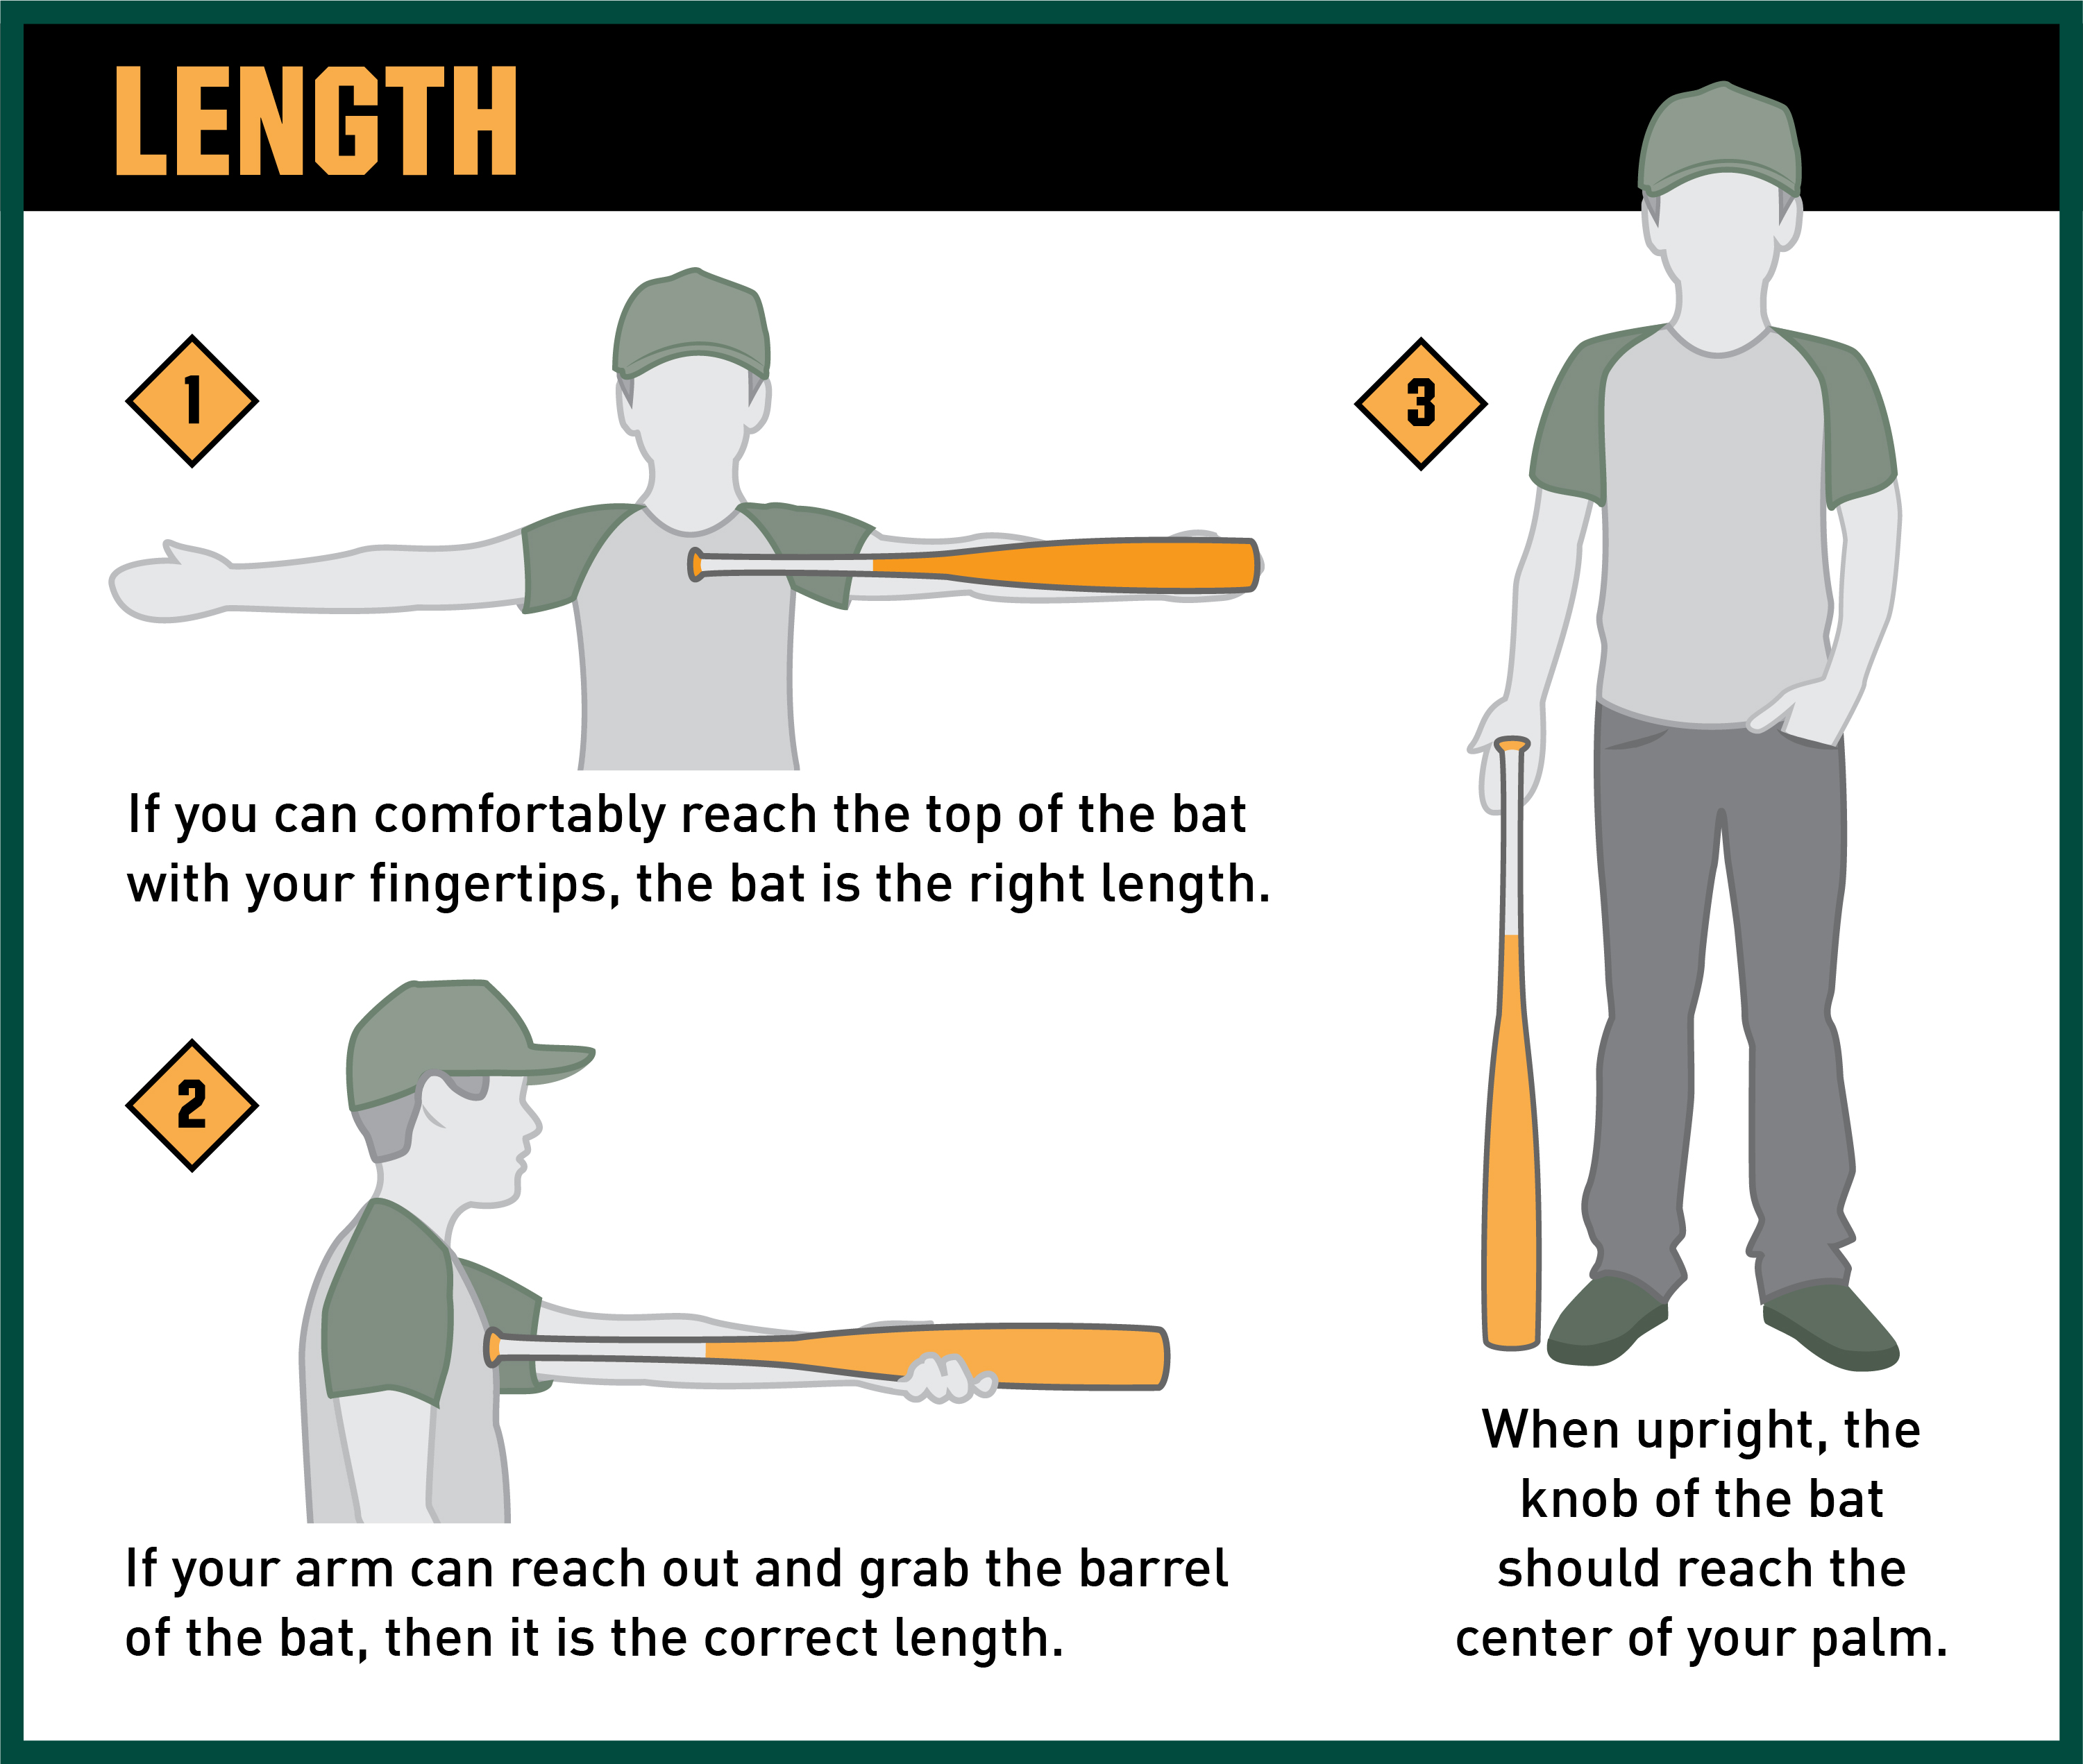 How to Buy a Baseball Bat | PRO TIPS by DICK'S Sporting Goods